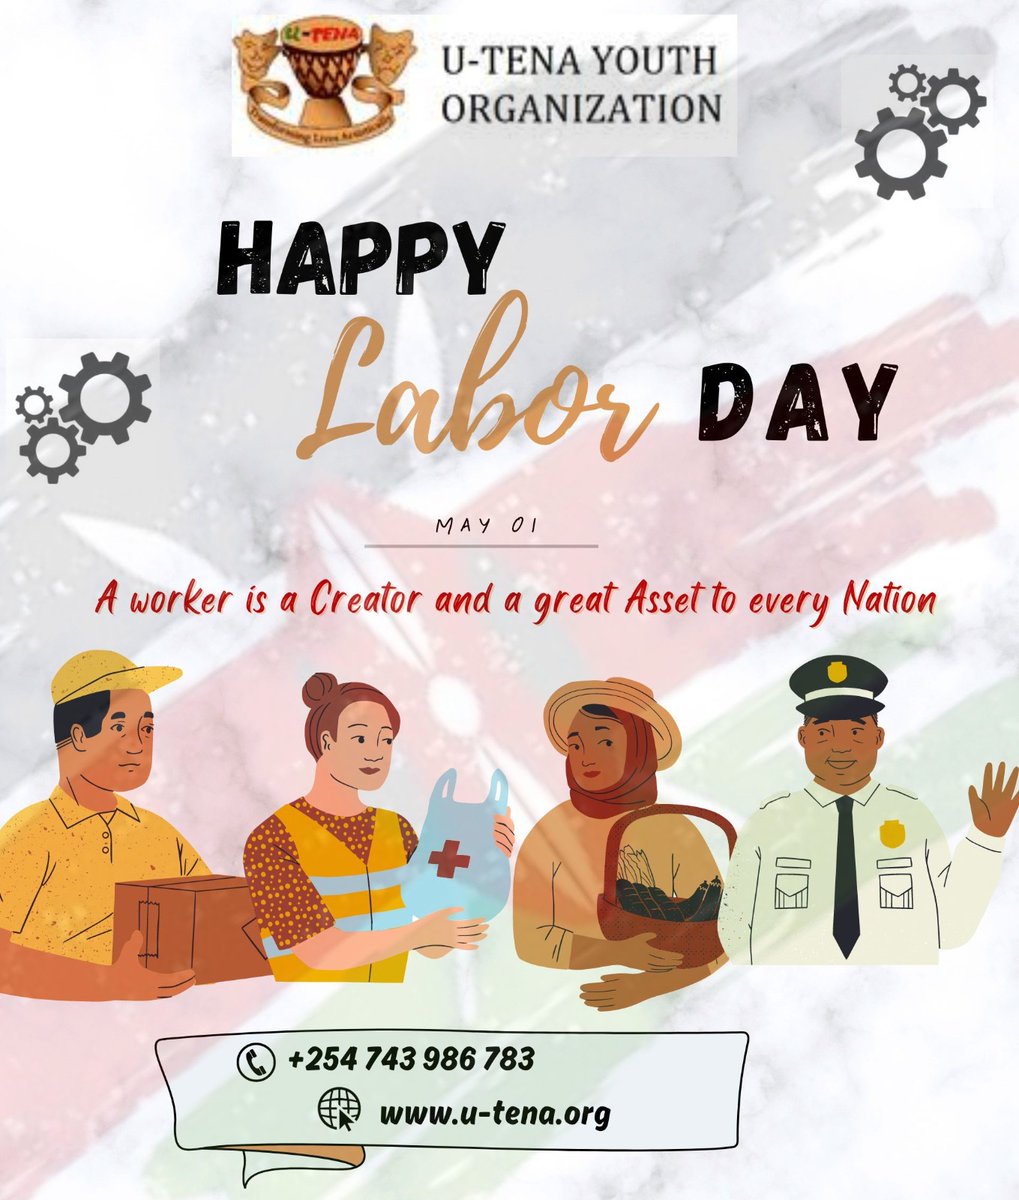 #HappyLabourDay , Kenya! @UnganoTena, we stand in solidarity with the hardworking men and women across the continent. #YouthWorkers  #DelivertheFuture #LaborDay